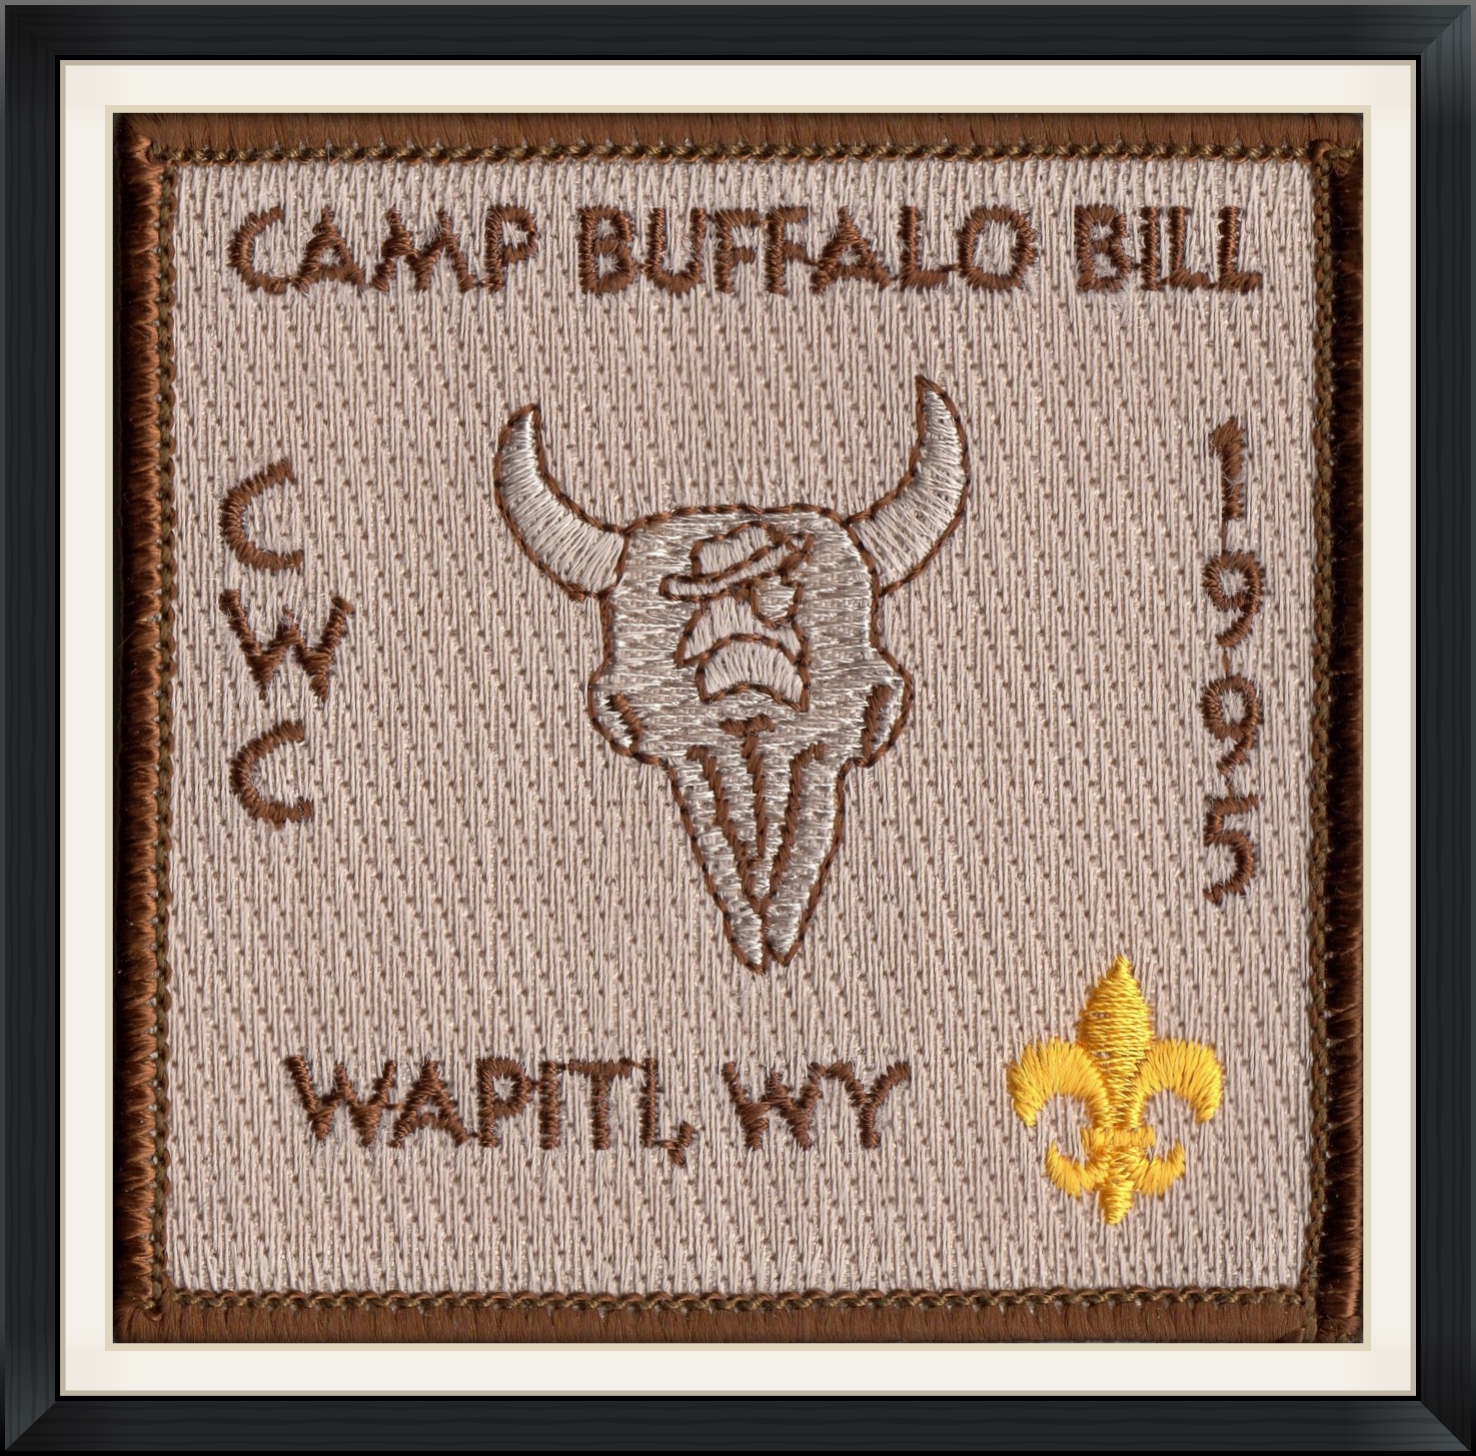 Sew/Iron on Embroidered/Stitched & Printed, Uniform/Vest/Jacket  Patches/Badges — Buffalo Bill Legacy Gallery